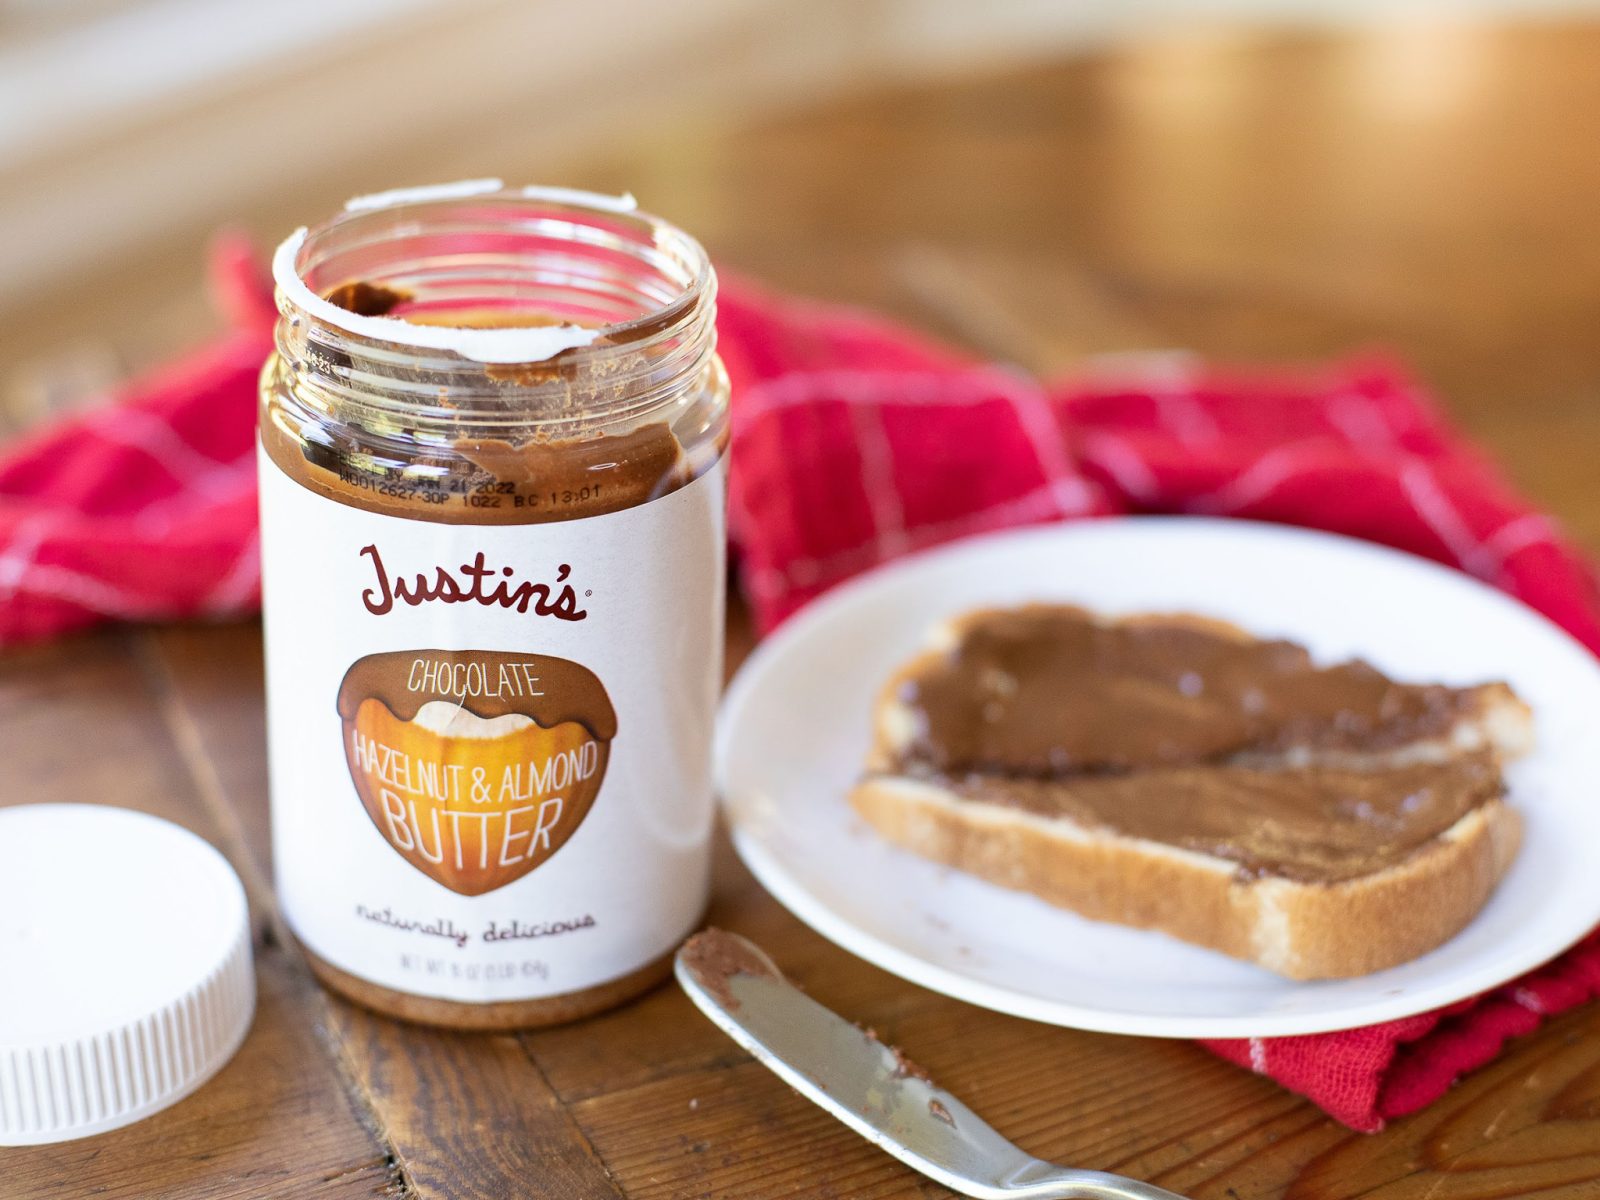 Justin’s Peanut Butter Digital Coupon For The Publix Sale – Save Over $2!